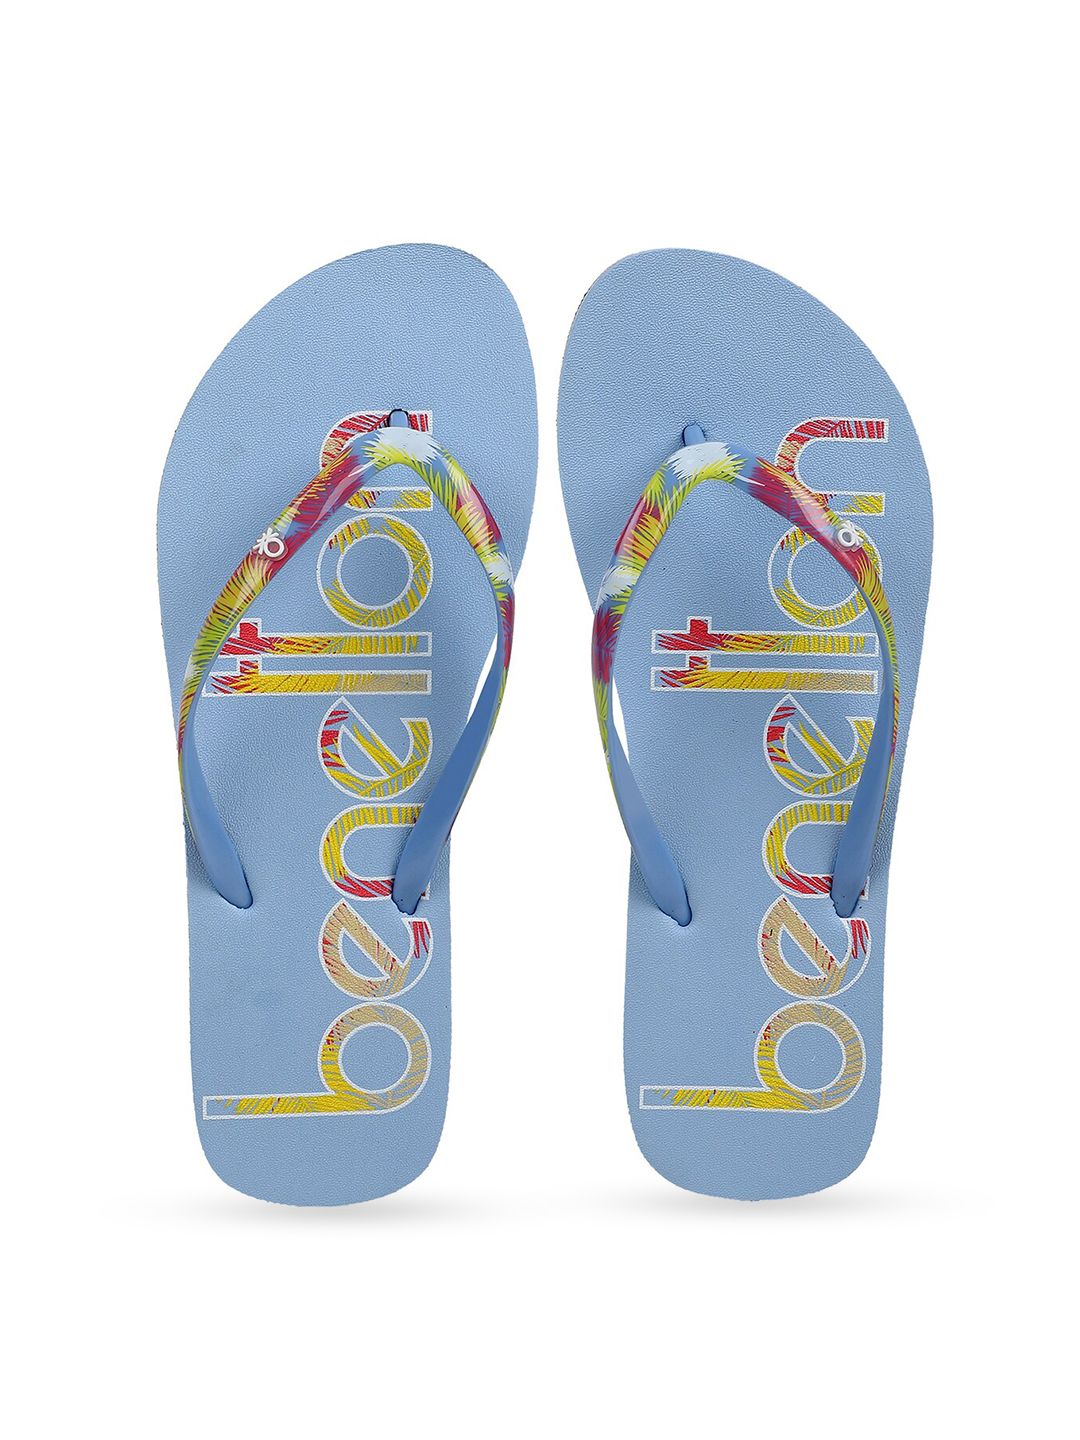 United Colors of Benetton Women Blue & Yellow Printed Rubber Thong Flip-Flops Price in India